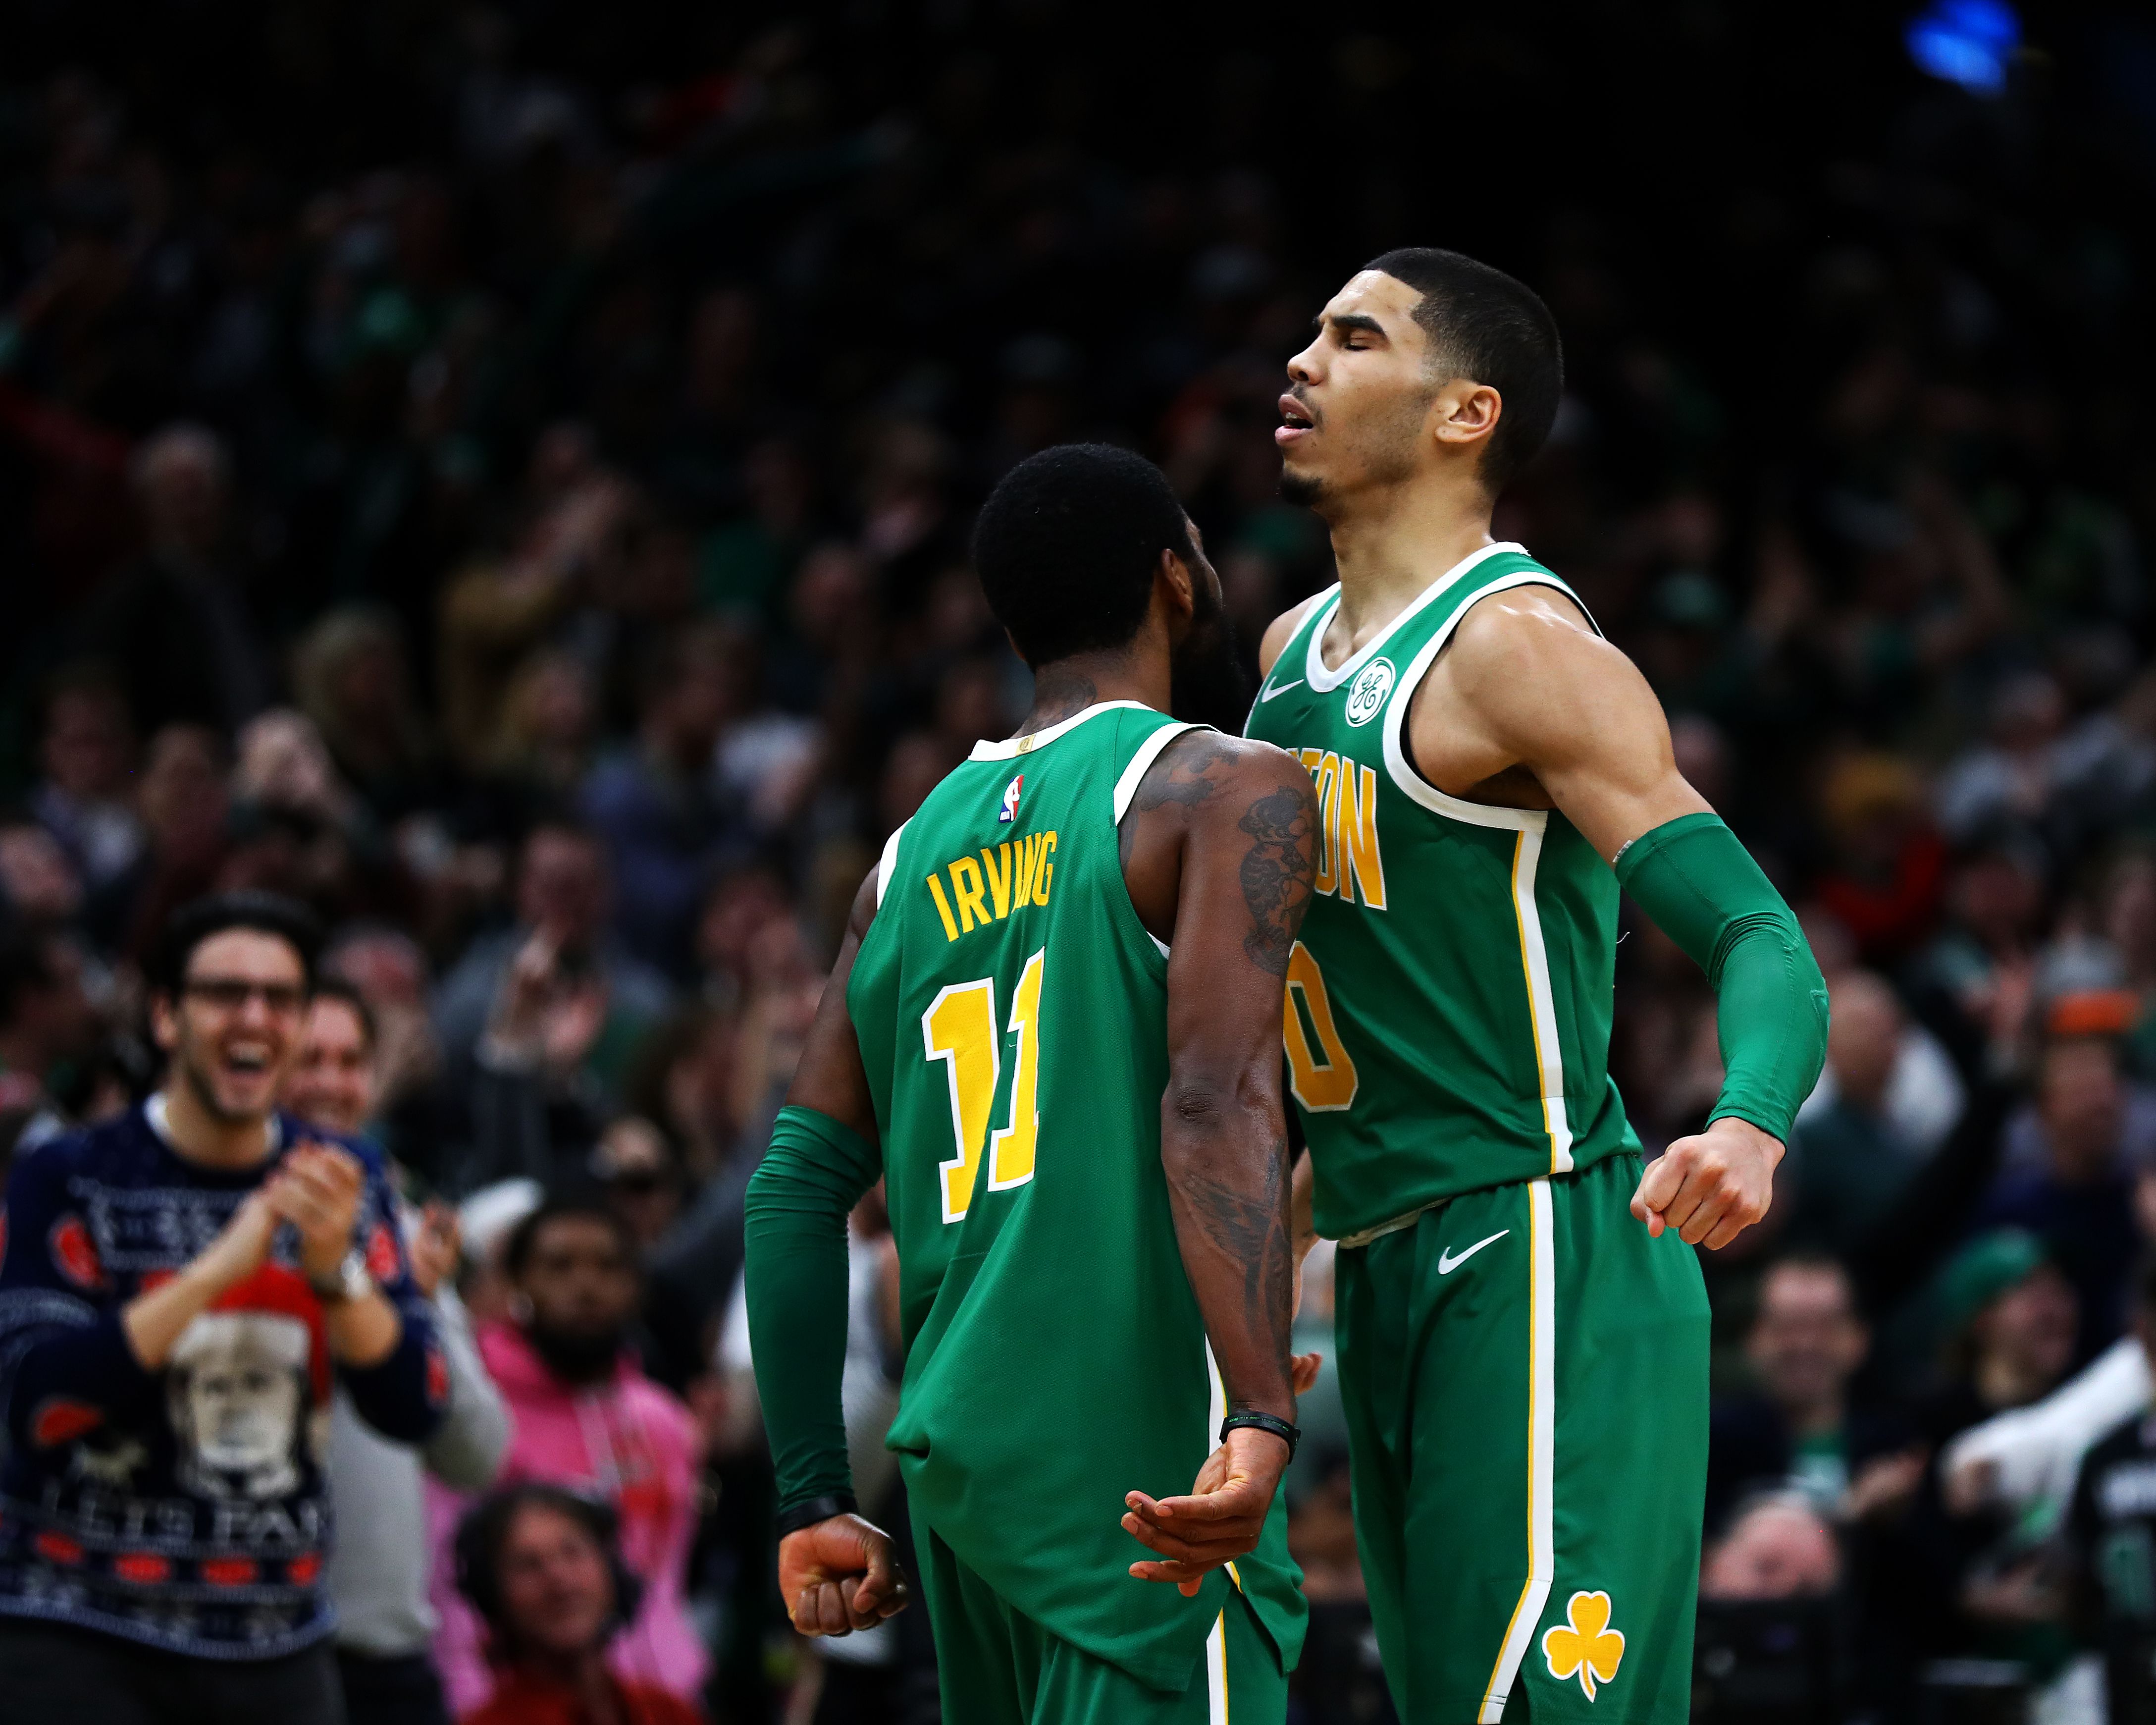 Kyrie Irving stays in touch with Jayson Tatum: Boston Celtics star